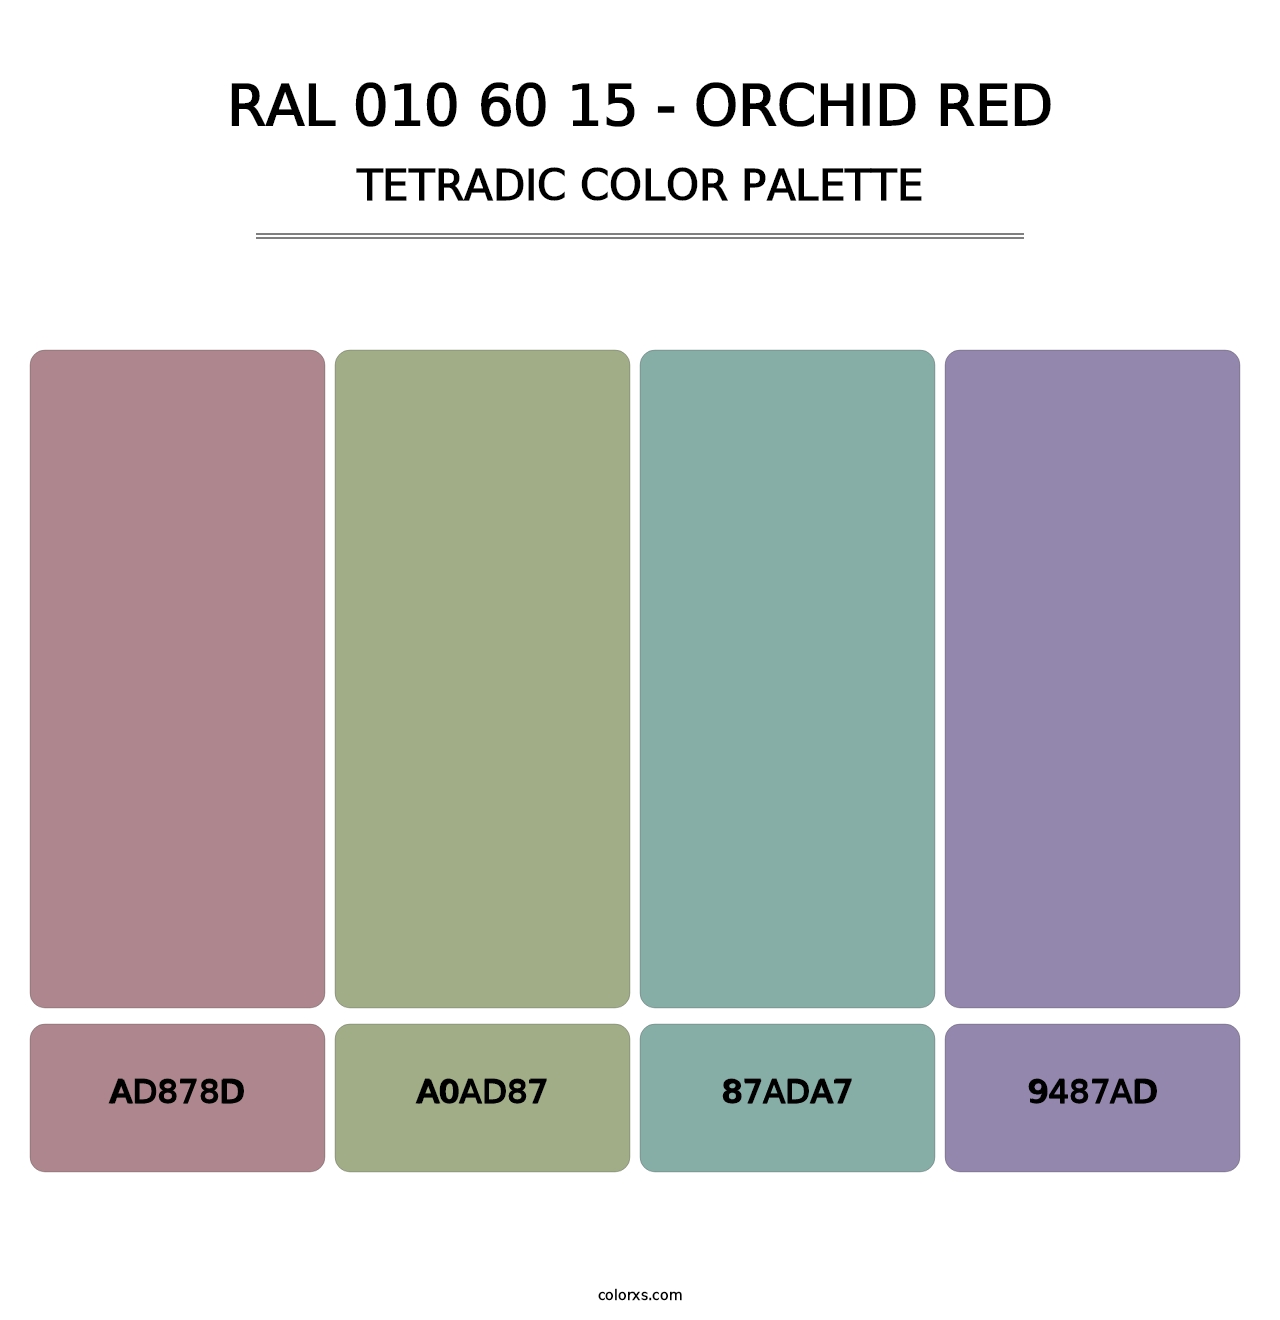 RAL 010 60 15 - Orchid Red - Tetradic Color Palette